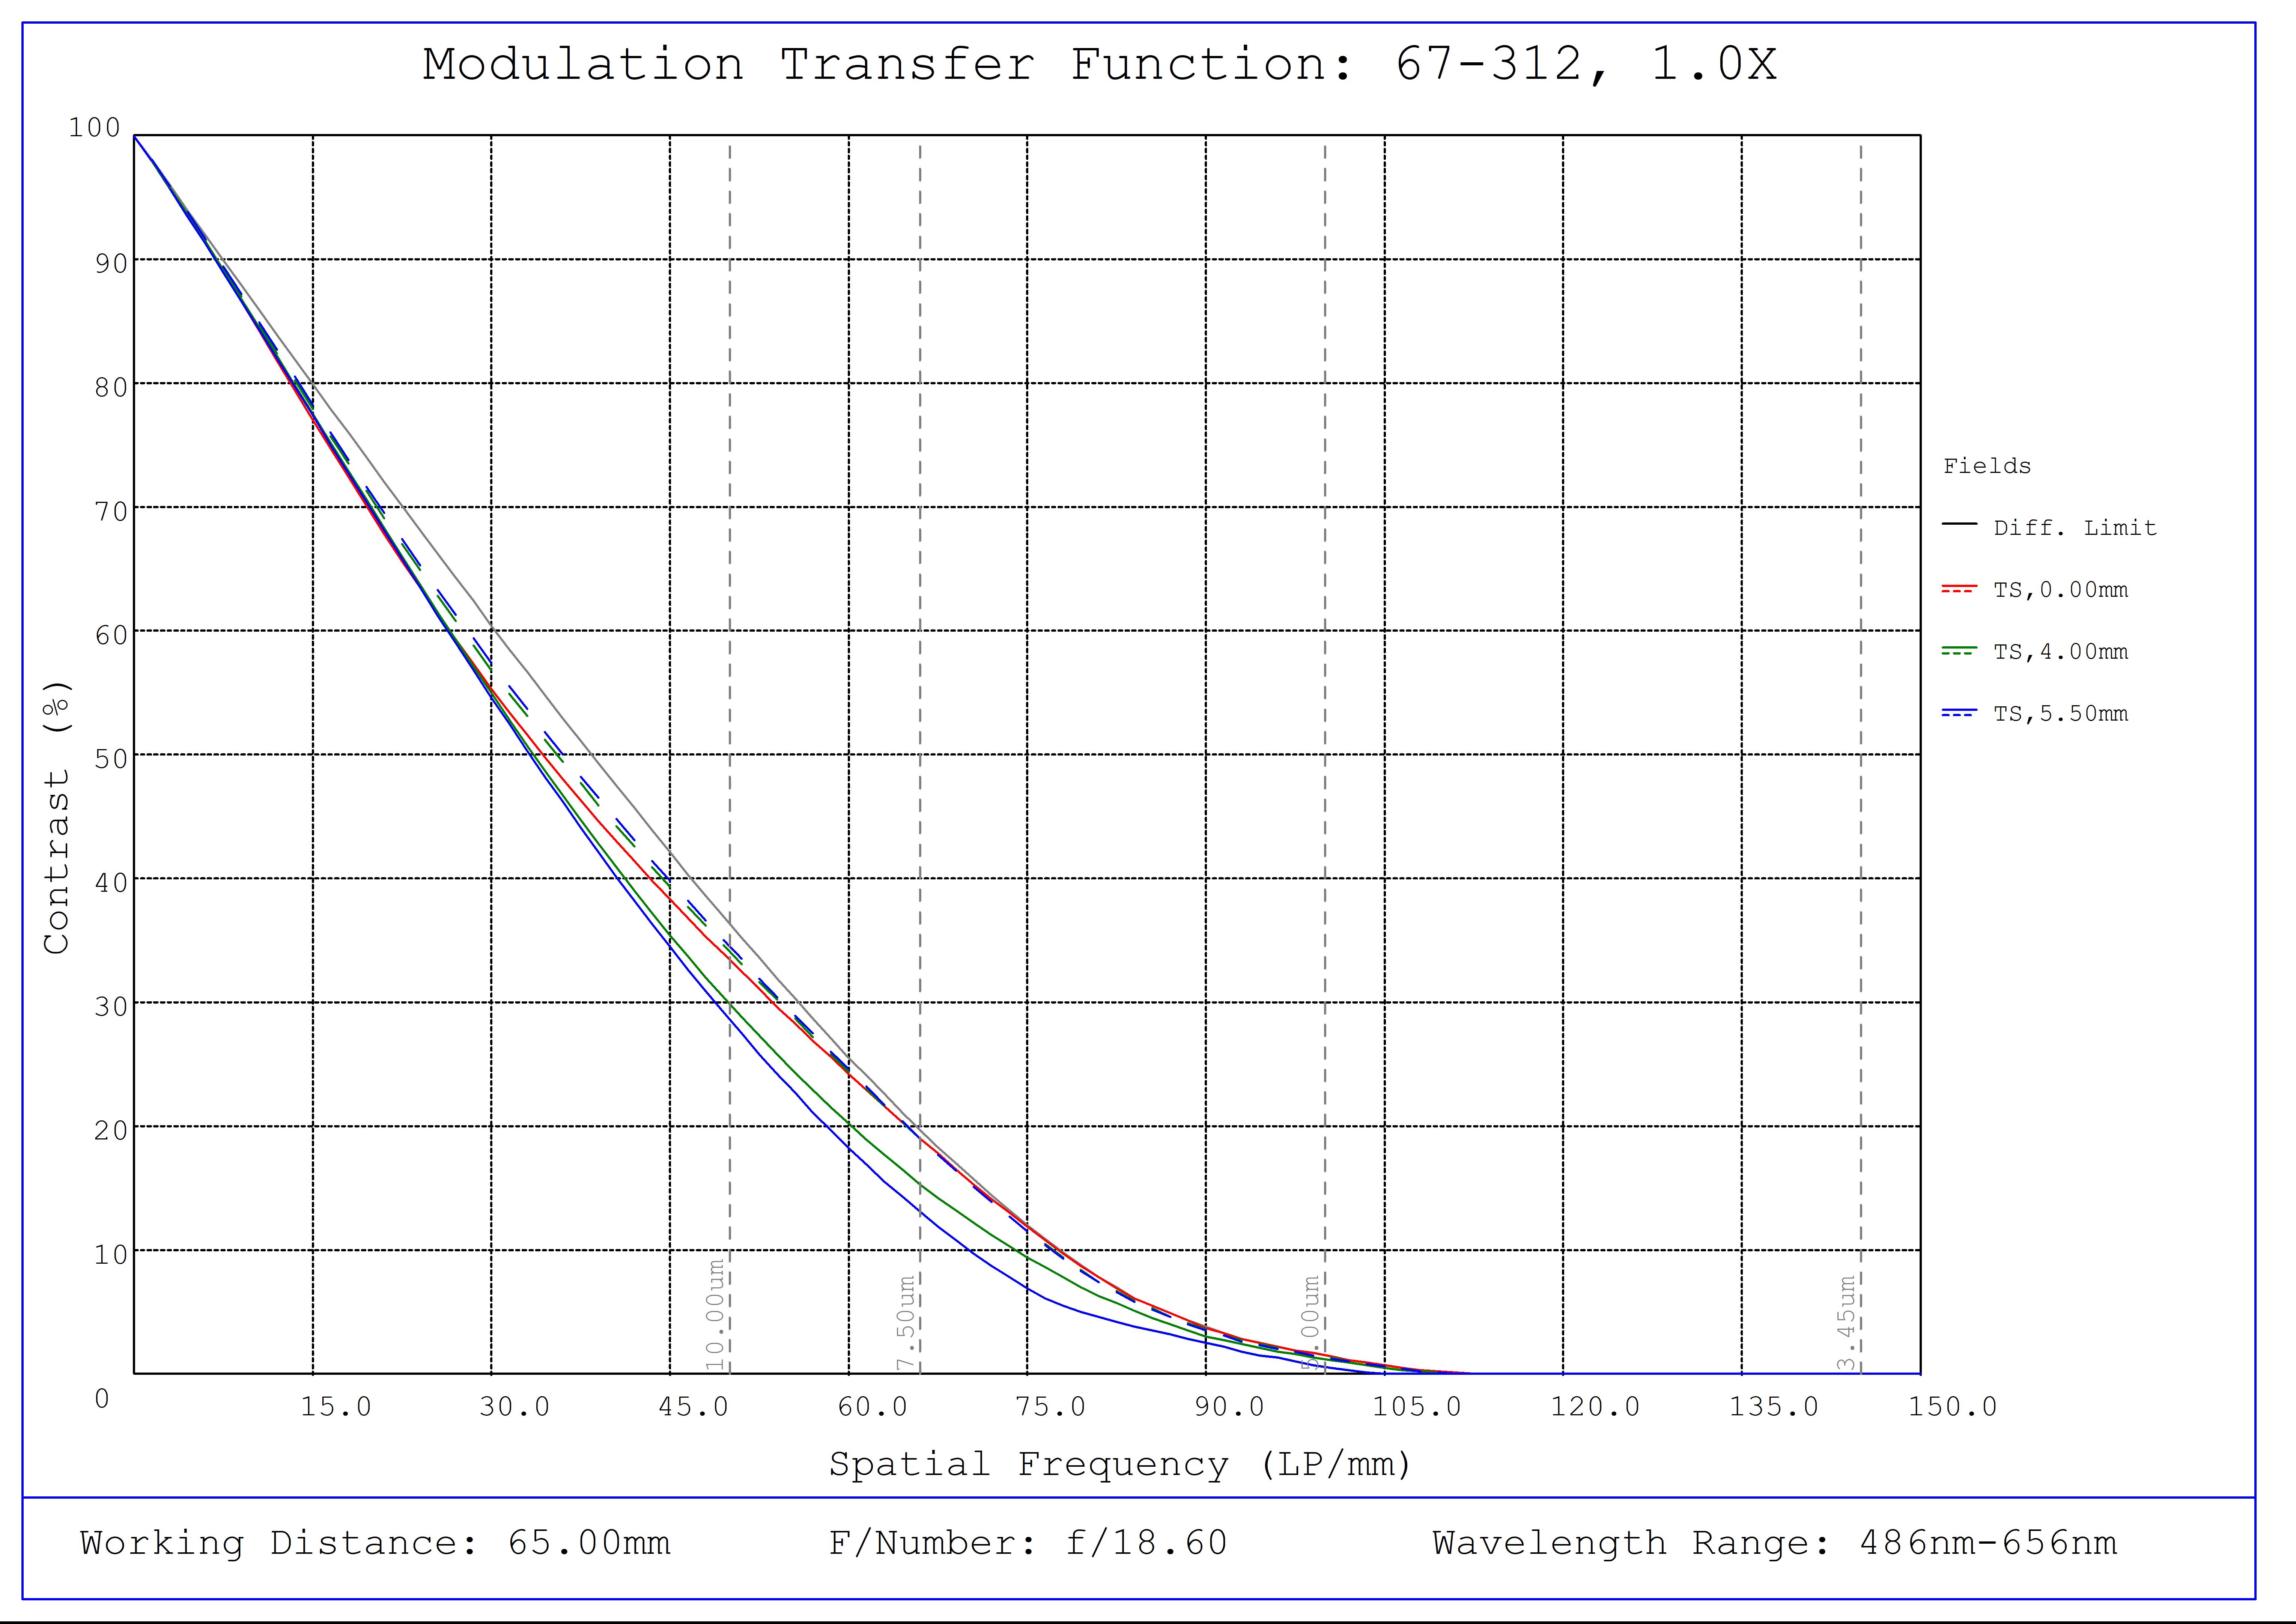 #67-312, 1X, 65mm WD, In-Line CompactTL™ Telecentric Lens, Modulated Transfer Function (MTF) Plot, 65mm Working Distance, f18.6